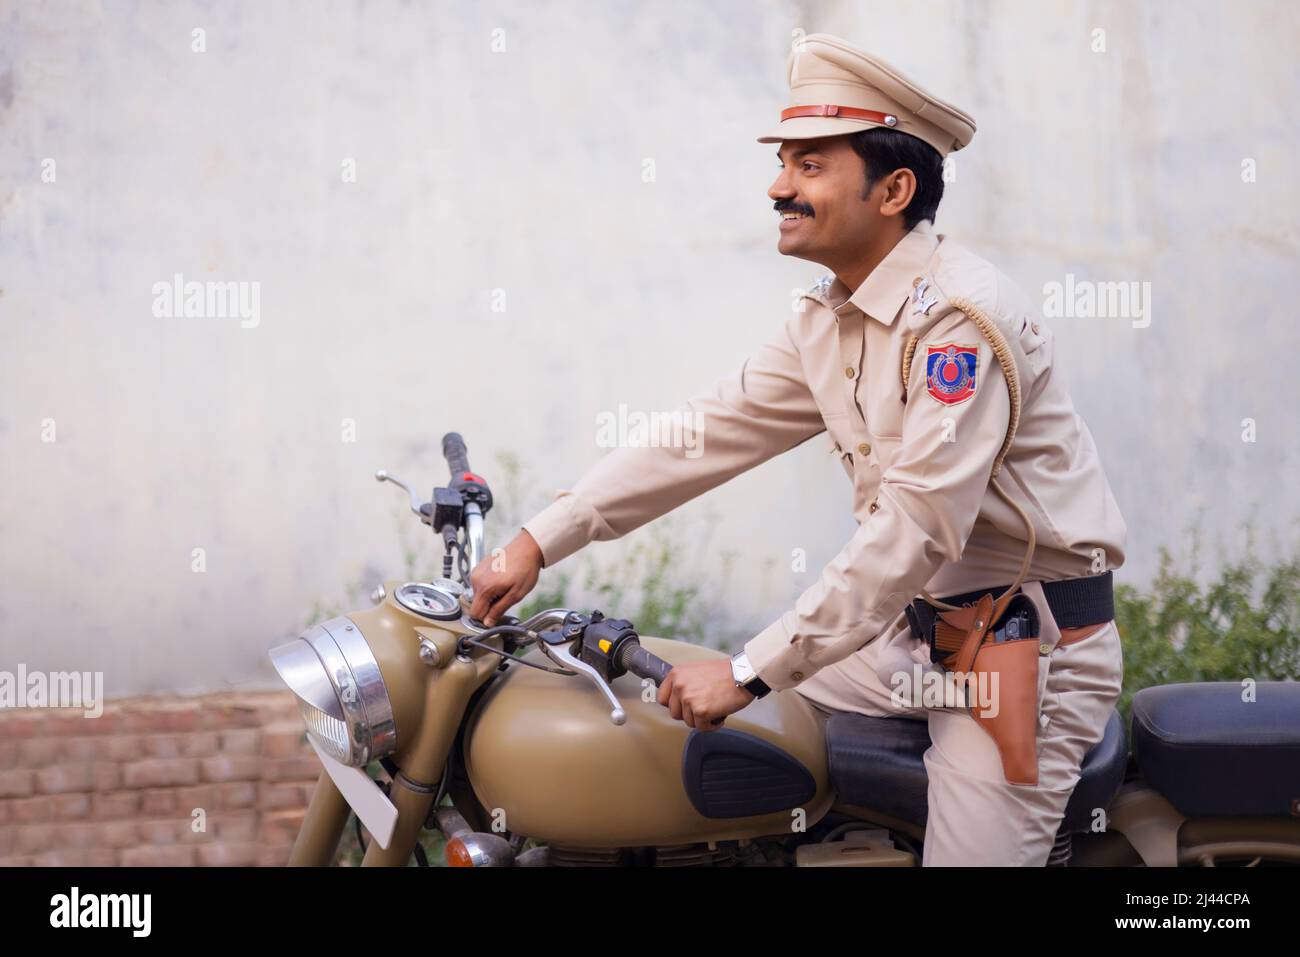 Portrait of an Indian policeman on bike Stock Photo